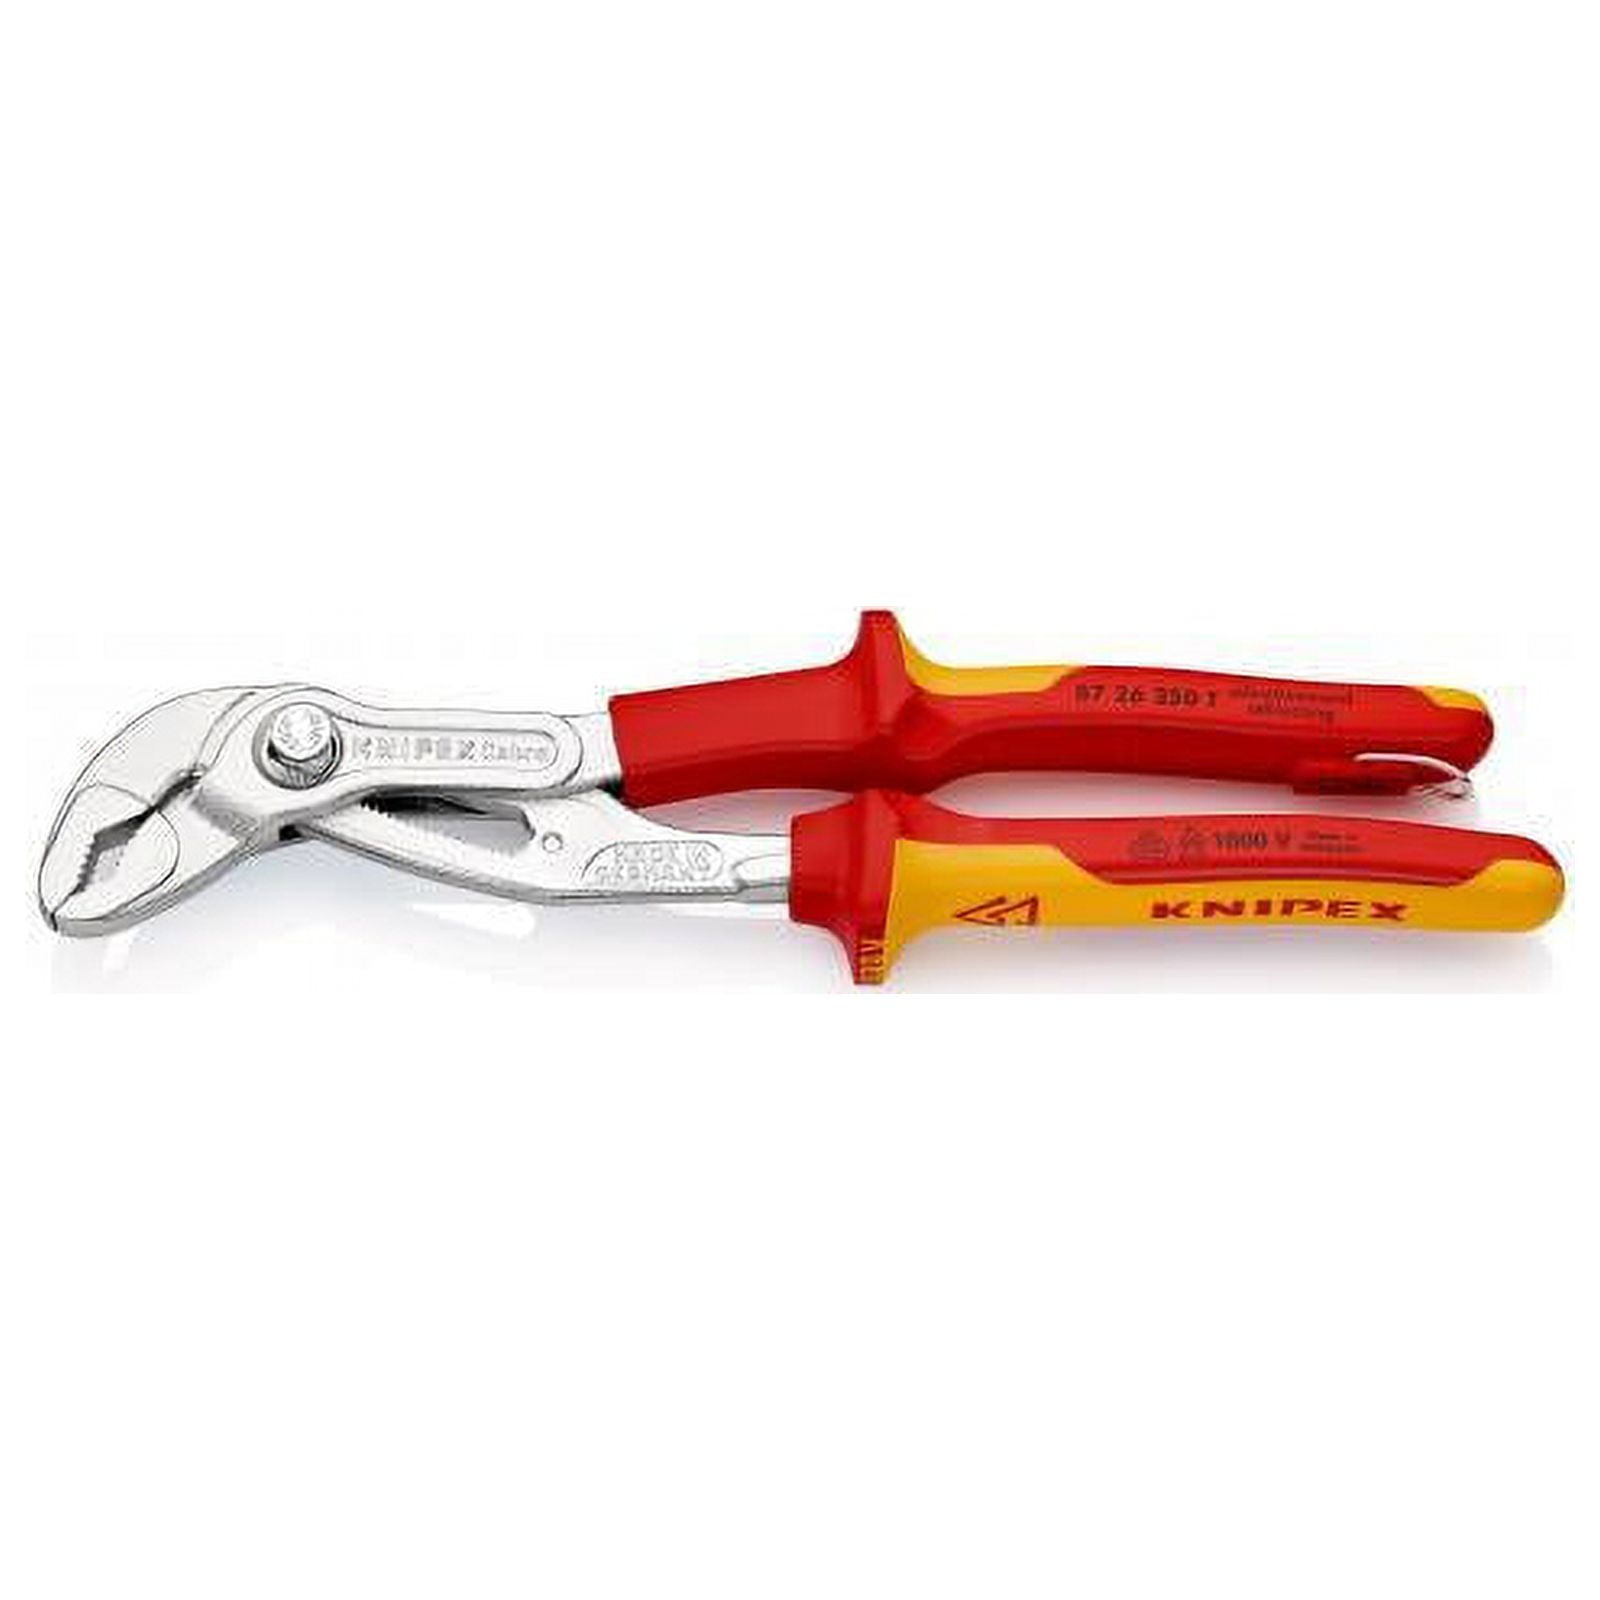 Genius Tools Heavy Duty Oil Filter Pliers, 60-90mm - AT-OF10